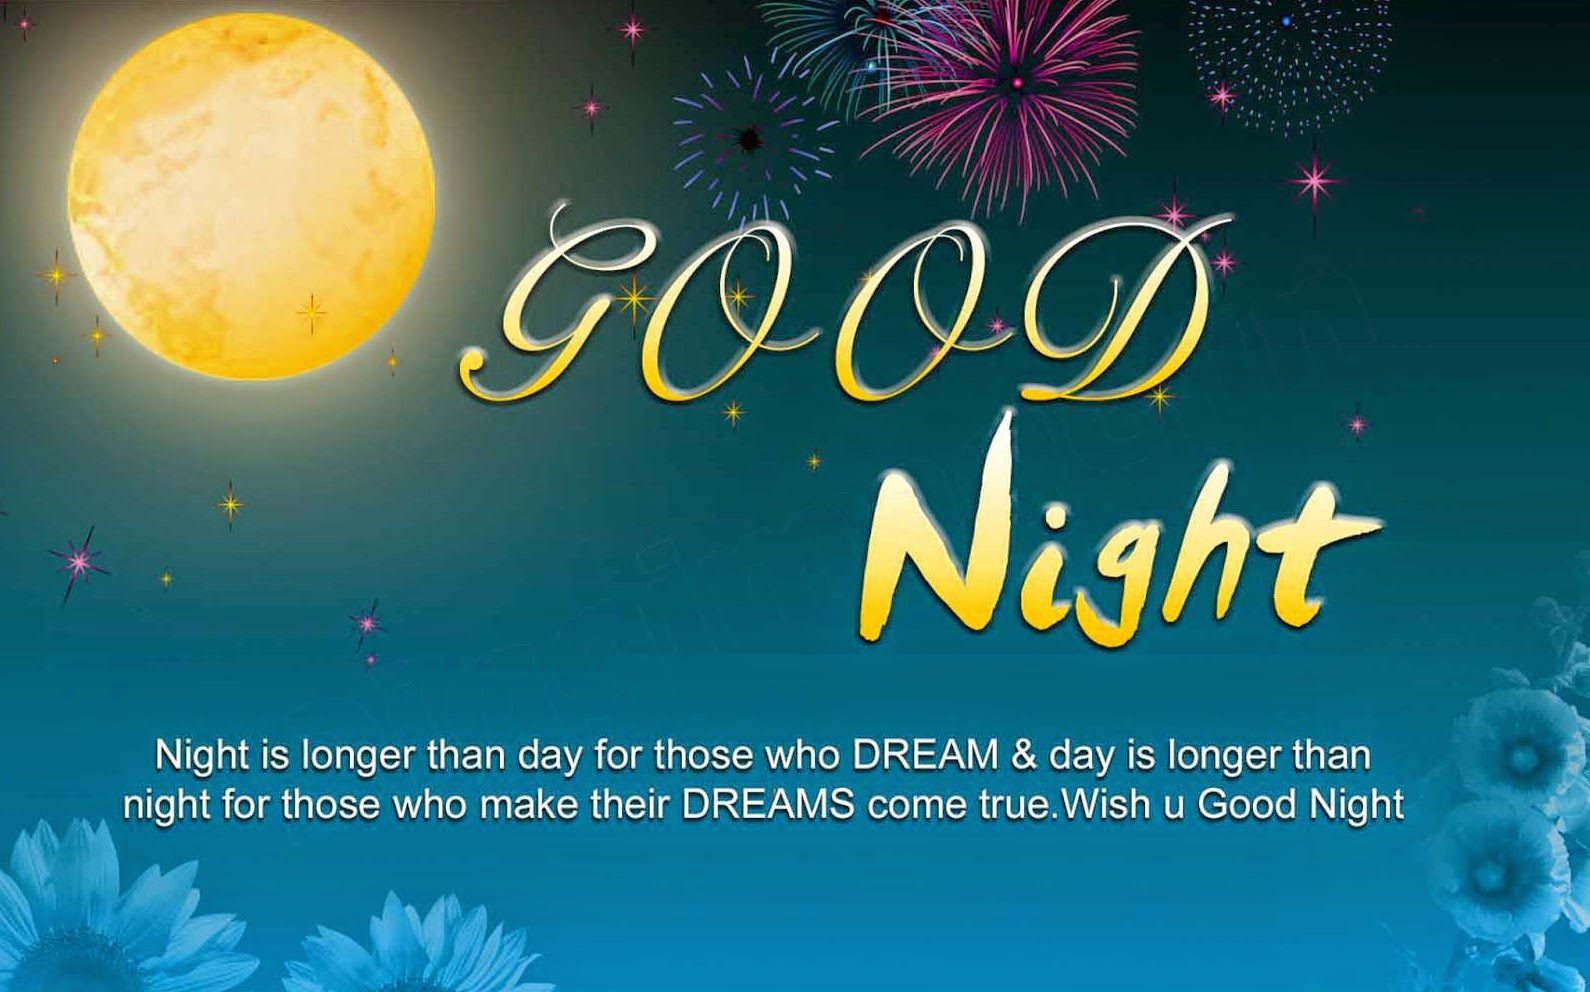 ROMANTIC GOOD NIGHT IMAGES, CARDS, WALLPAPERS - Beautiful Messages1590 x 992